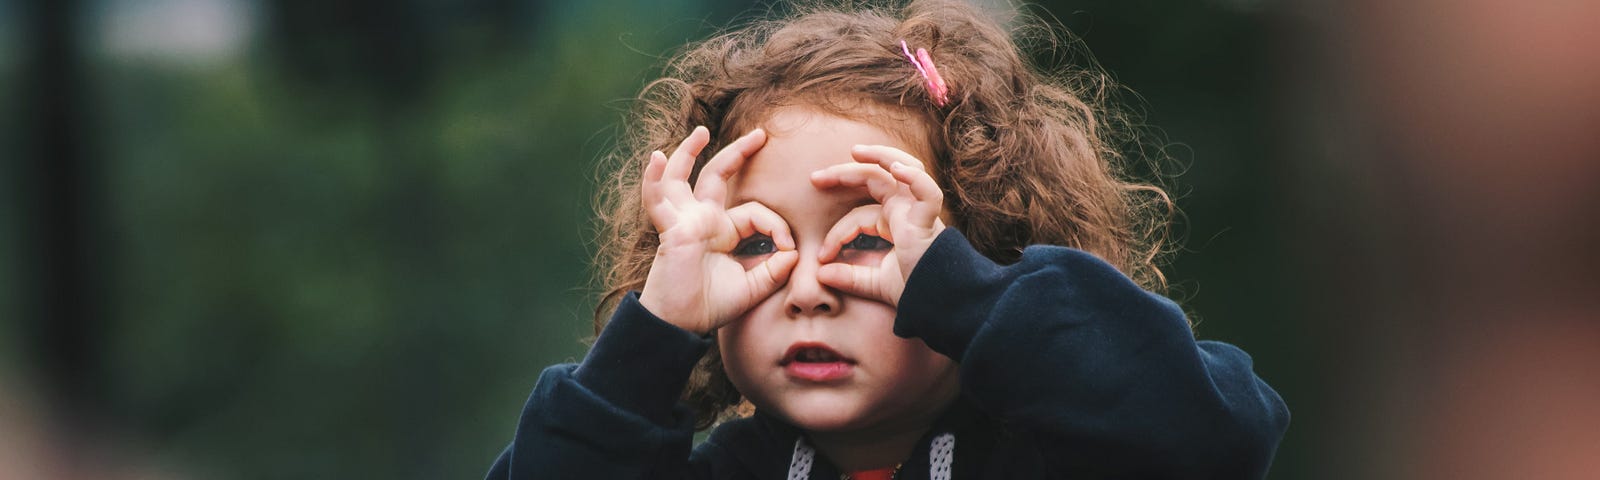 Young girl with hands positioned like glasses infront of her face